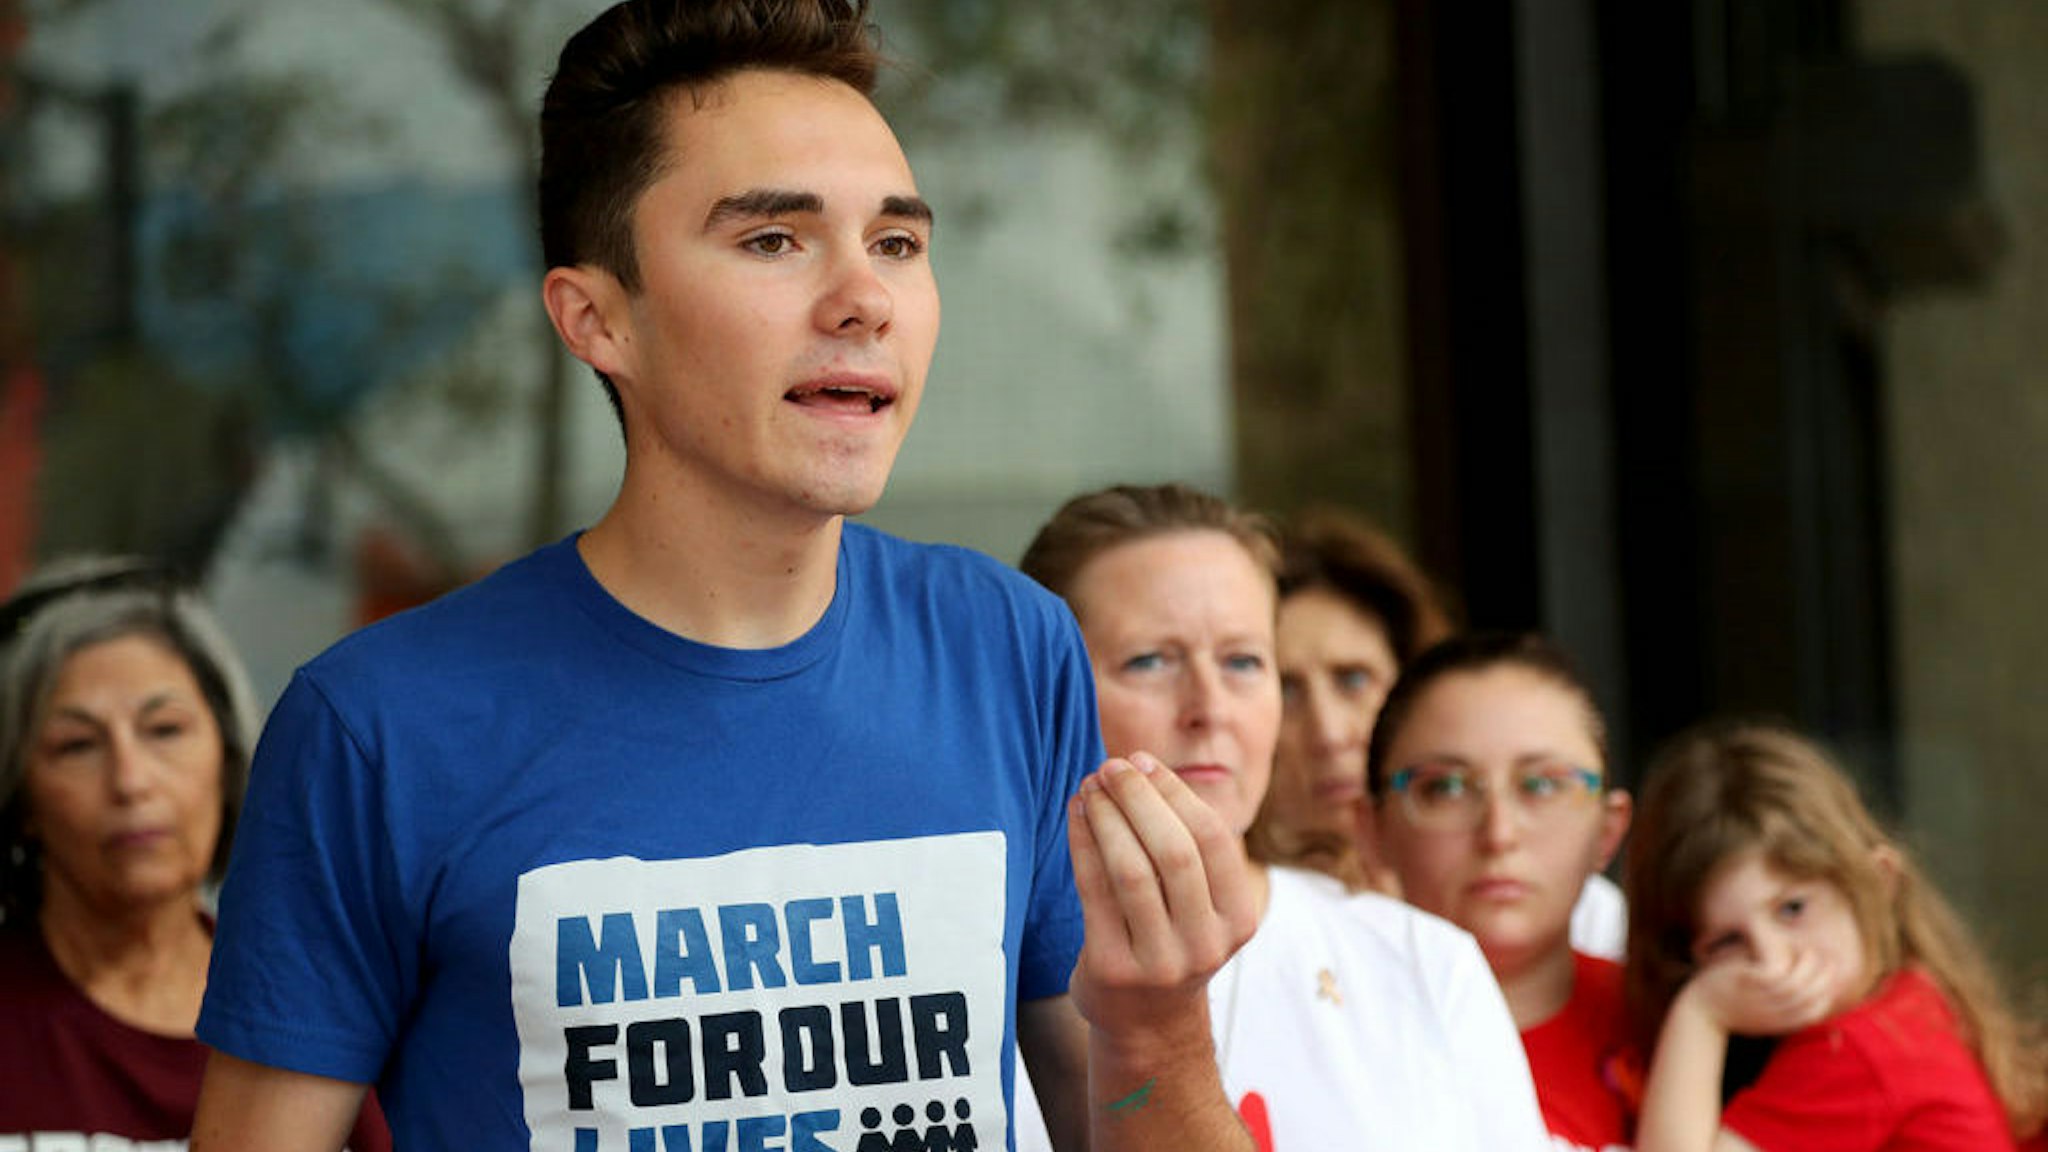 Parkland survivor David Hogg speaks during a news conference at the Broward County Government Center in Fort Lauderdale on Monday, Feb. 11, 2019, following the submission of 200 petitions to the Broward County Supervisor of Elections office as part of a ballot initiative to put on the 2020 election ballot a ban on the sale of military-grade weapons. (Amy Beth Bennett/South Florida Sun Sentinel/TNS)